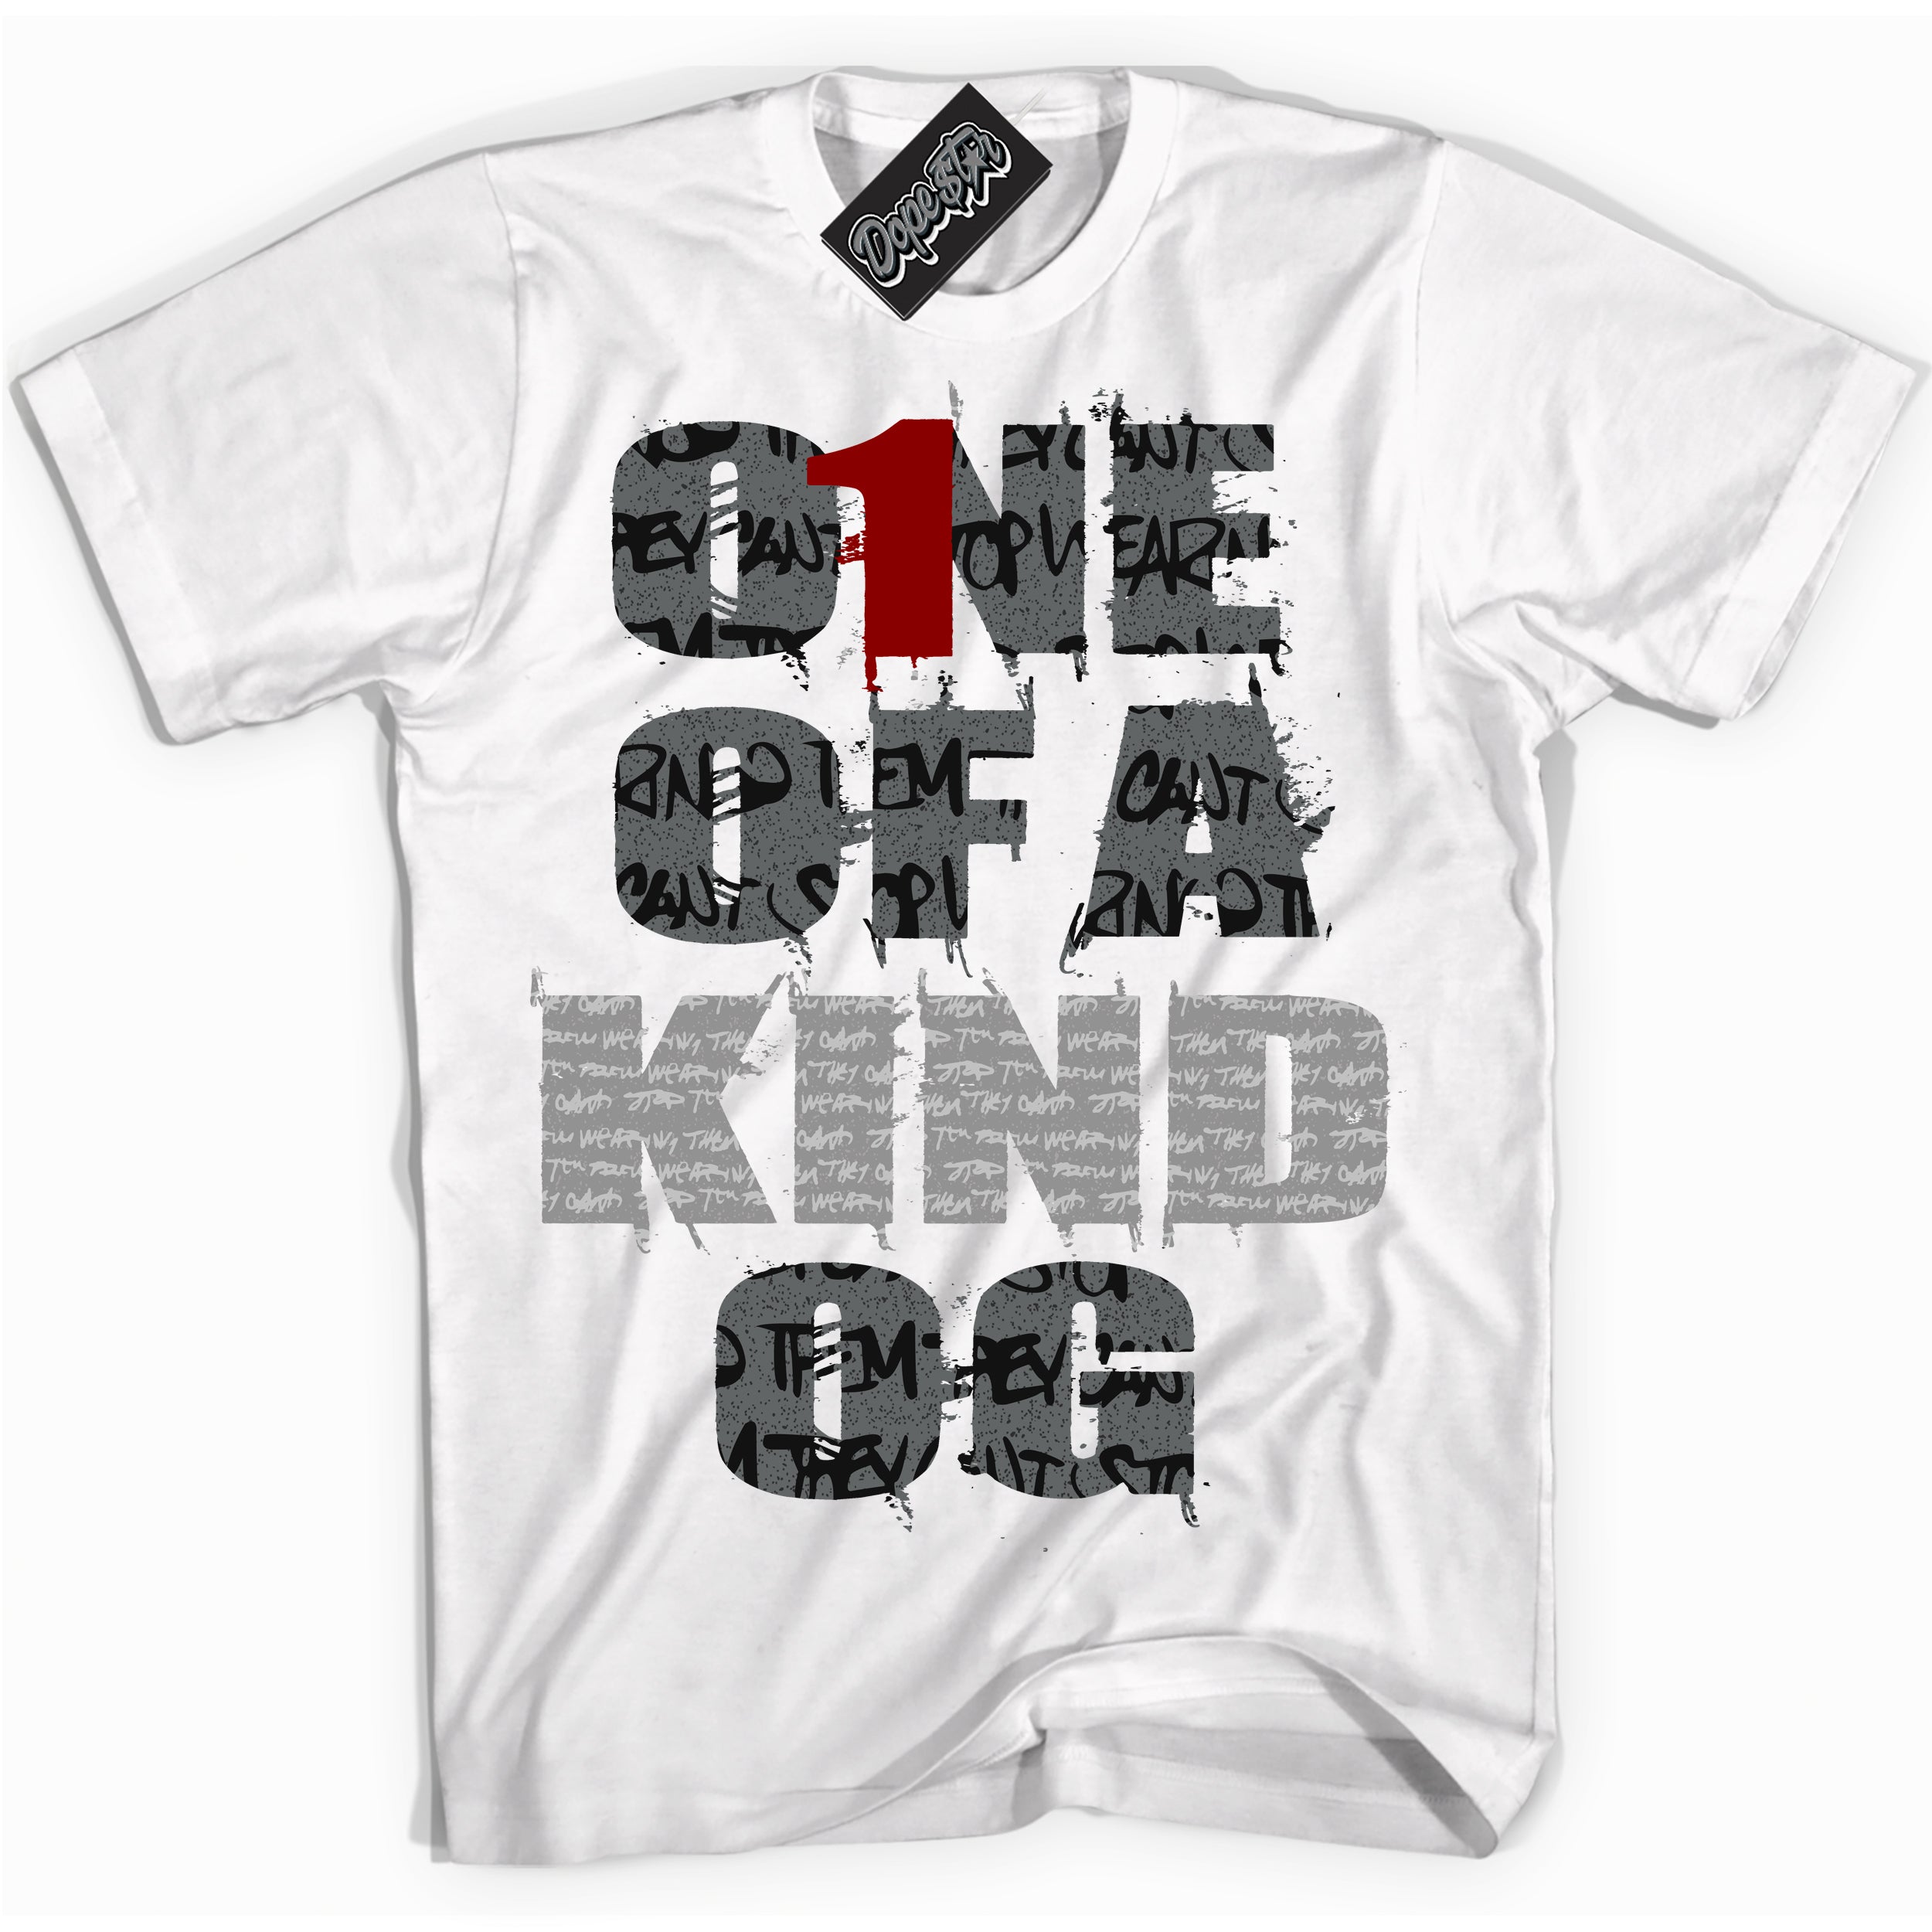 Cool White Shirt with “ One Of A Kind ” design that perfectly matches Rebellionaire 1s Sneakers.